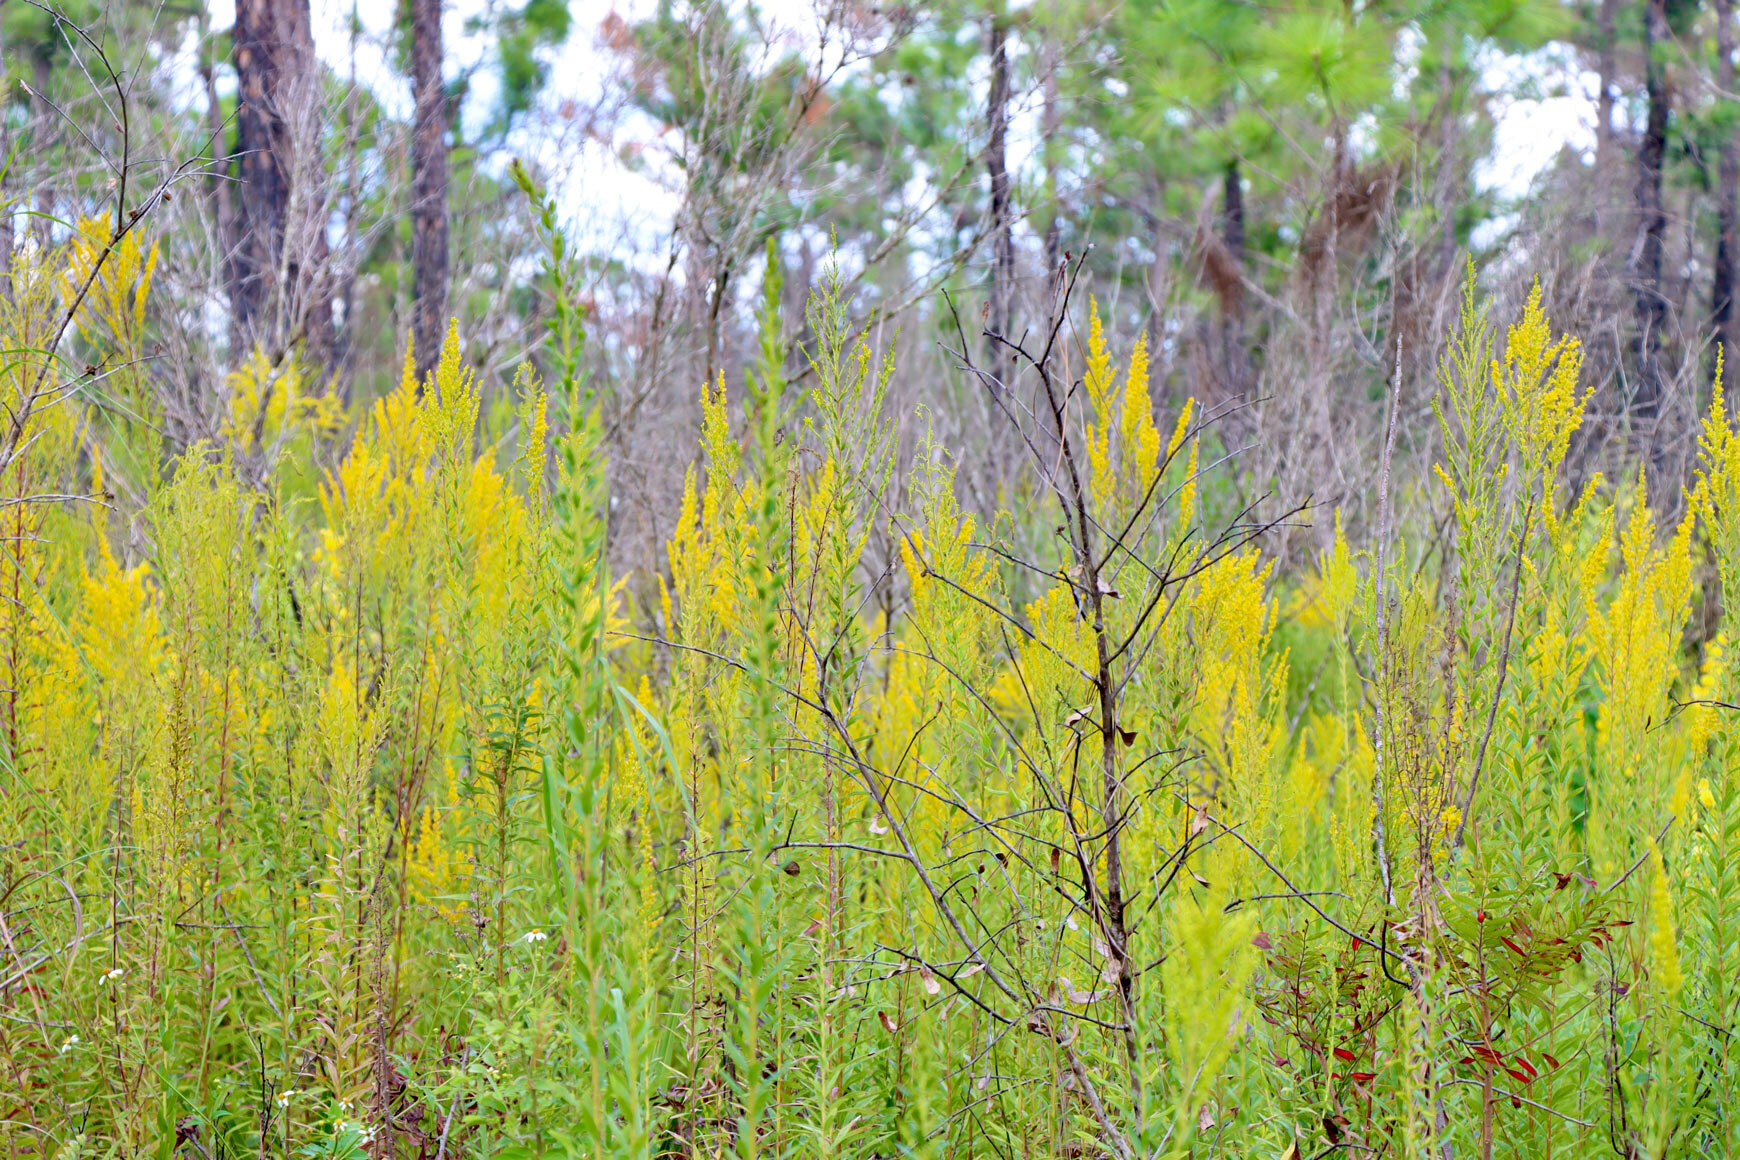  Goldenrod lining the trail  